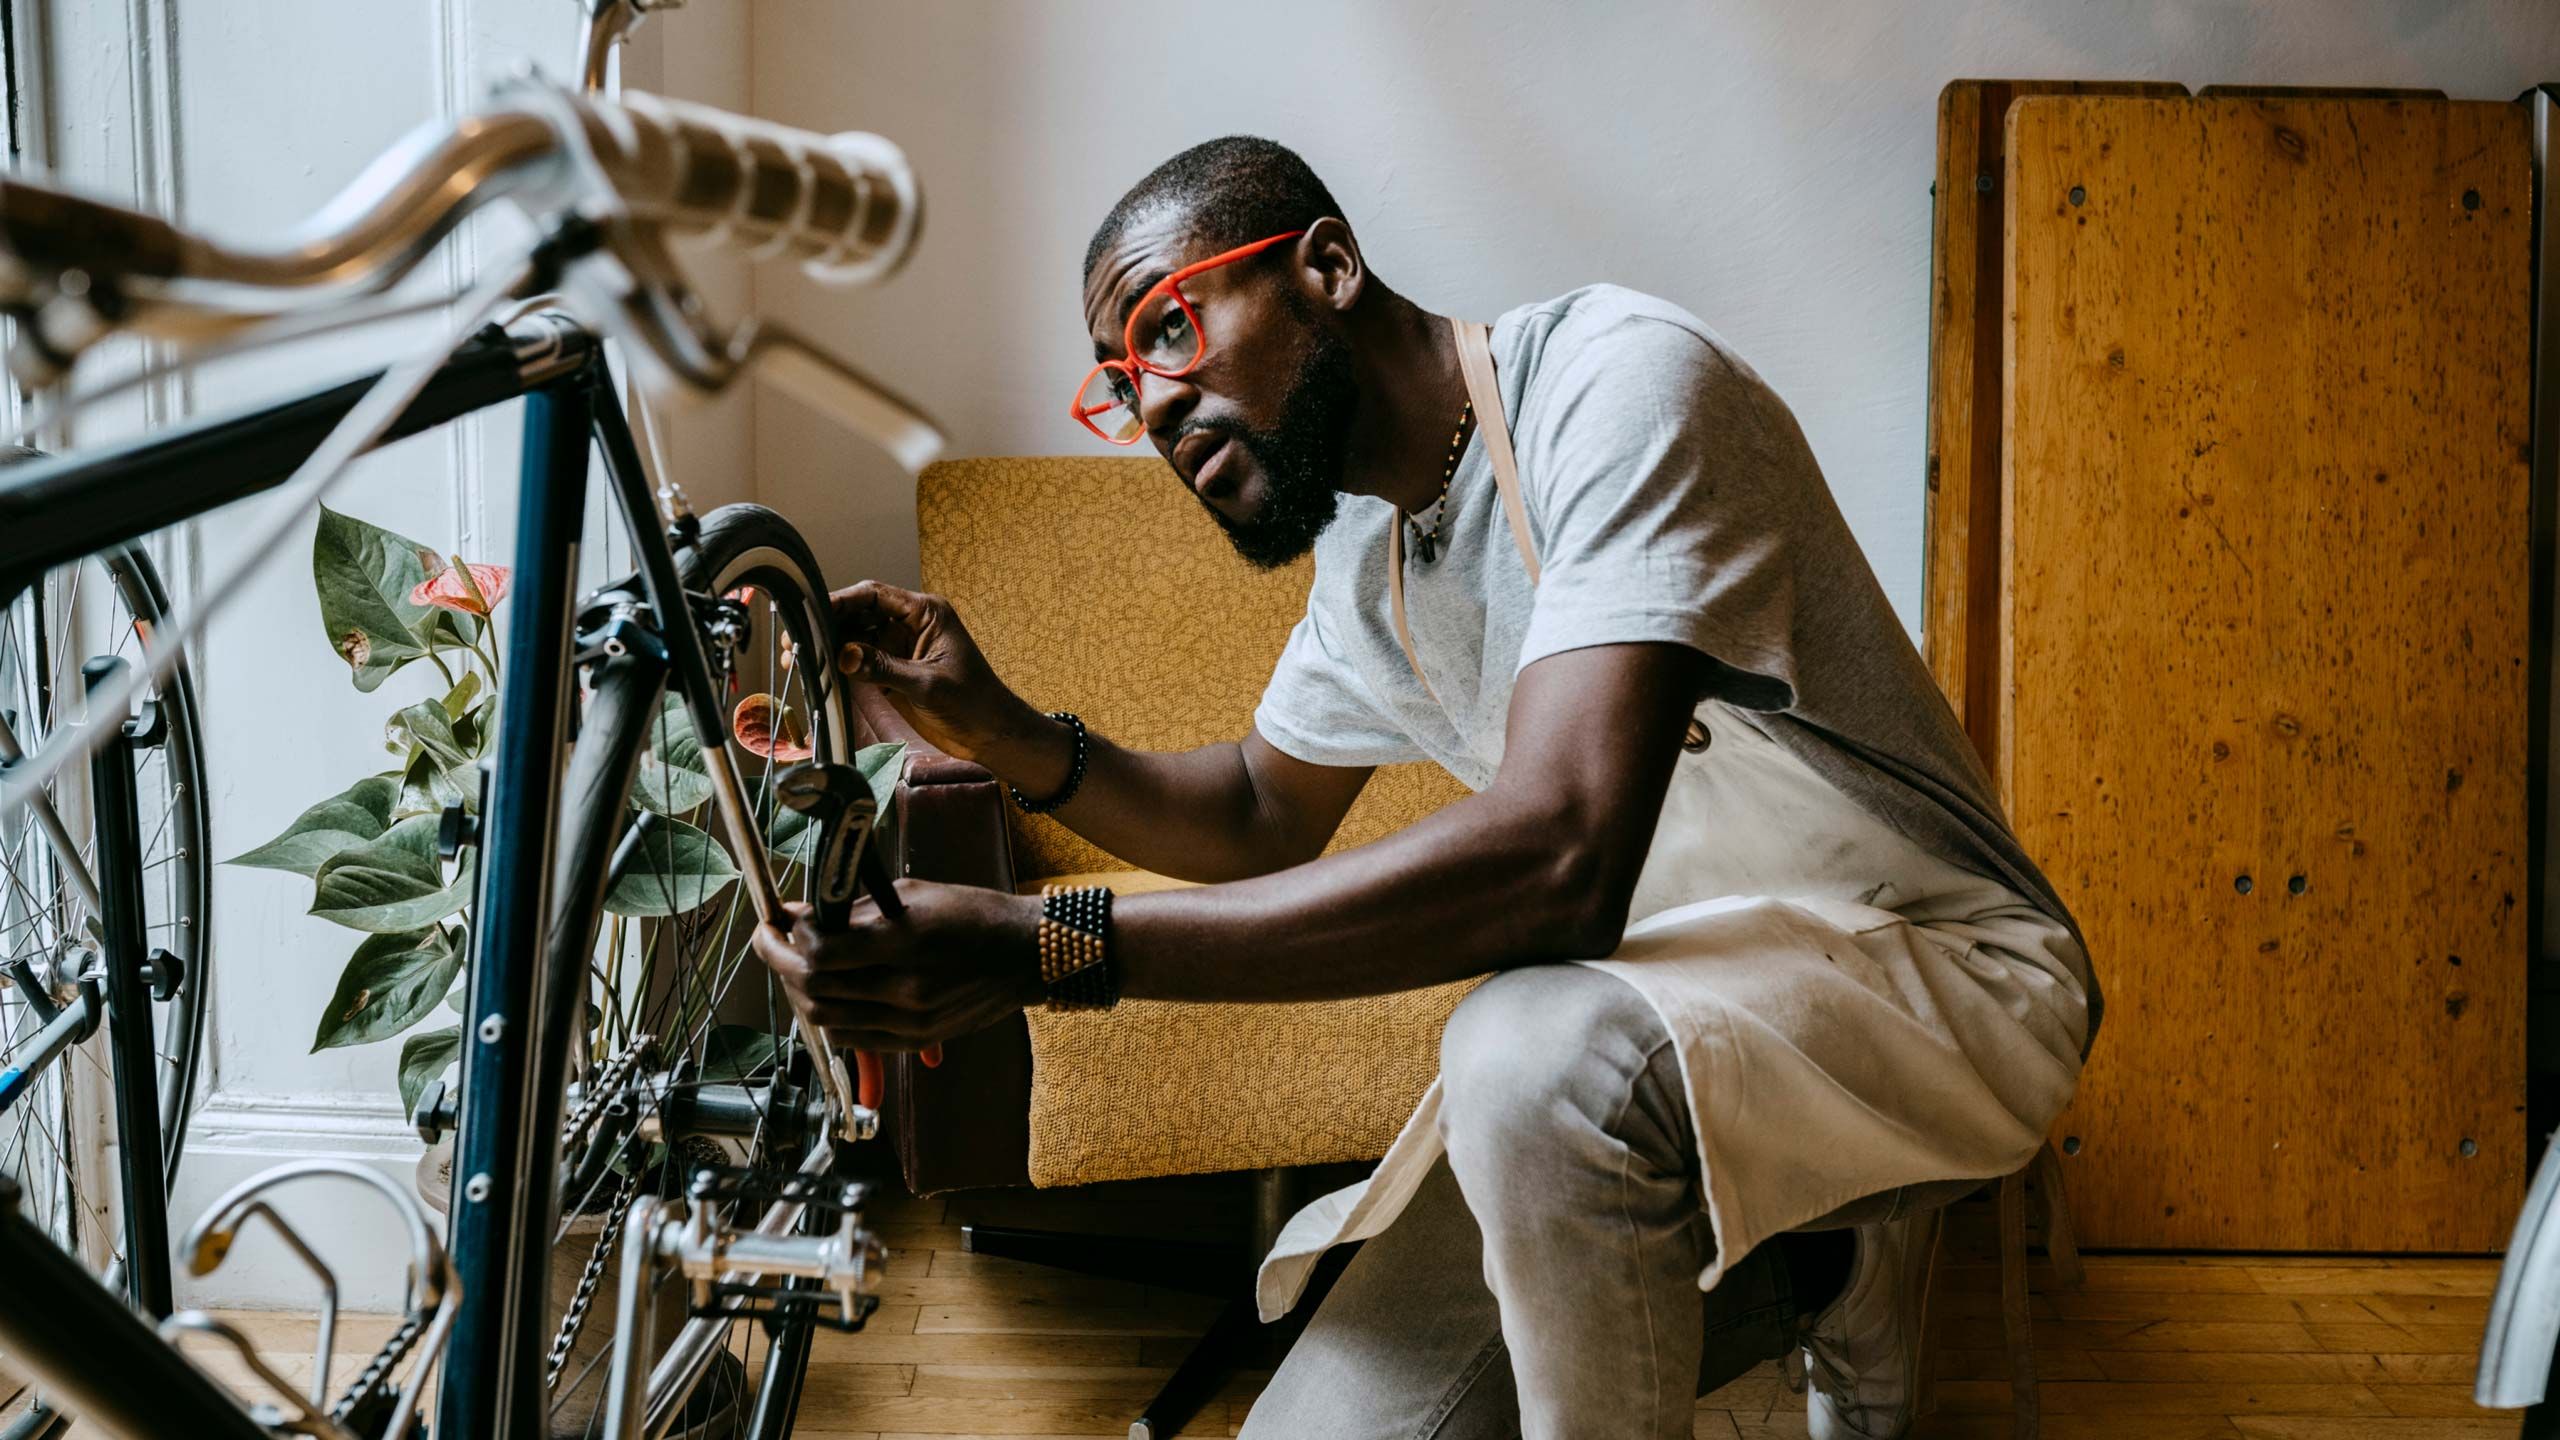 A man with red glasses working on a bicycle